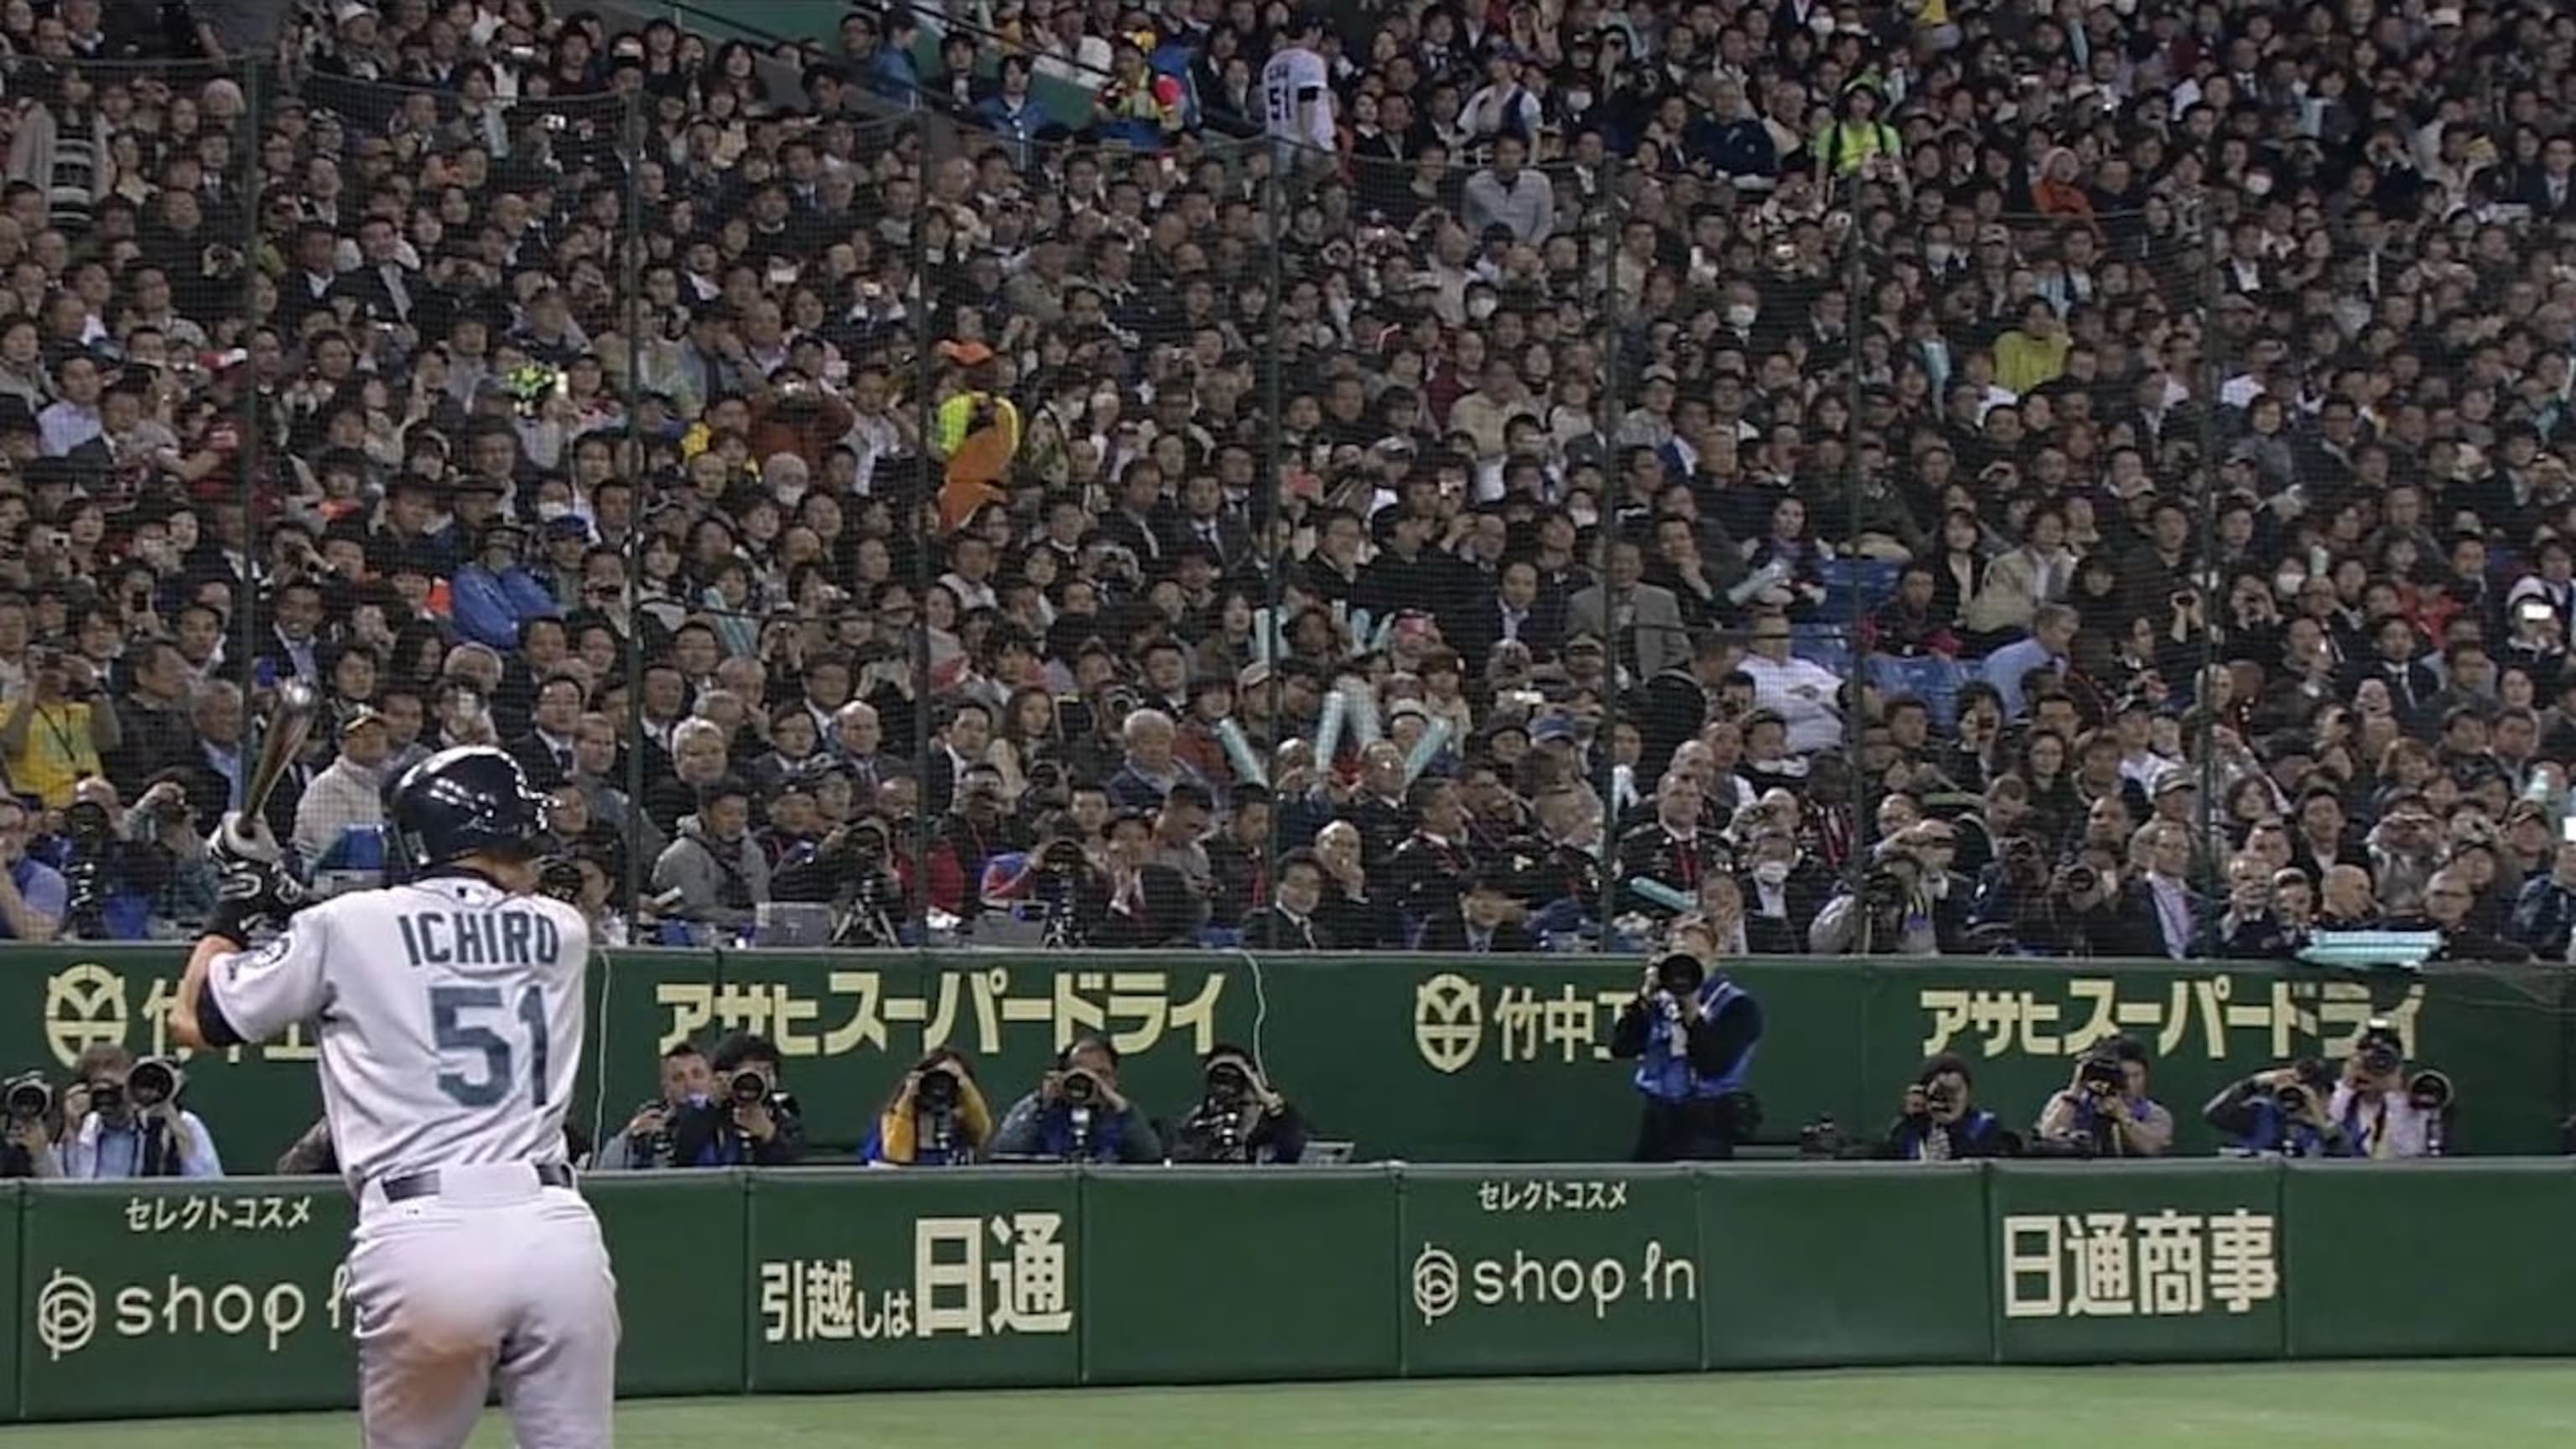 Mariners played Athletics in Japan in 2012